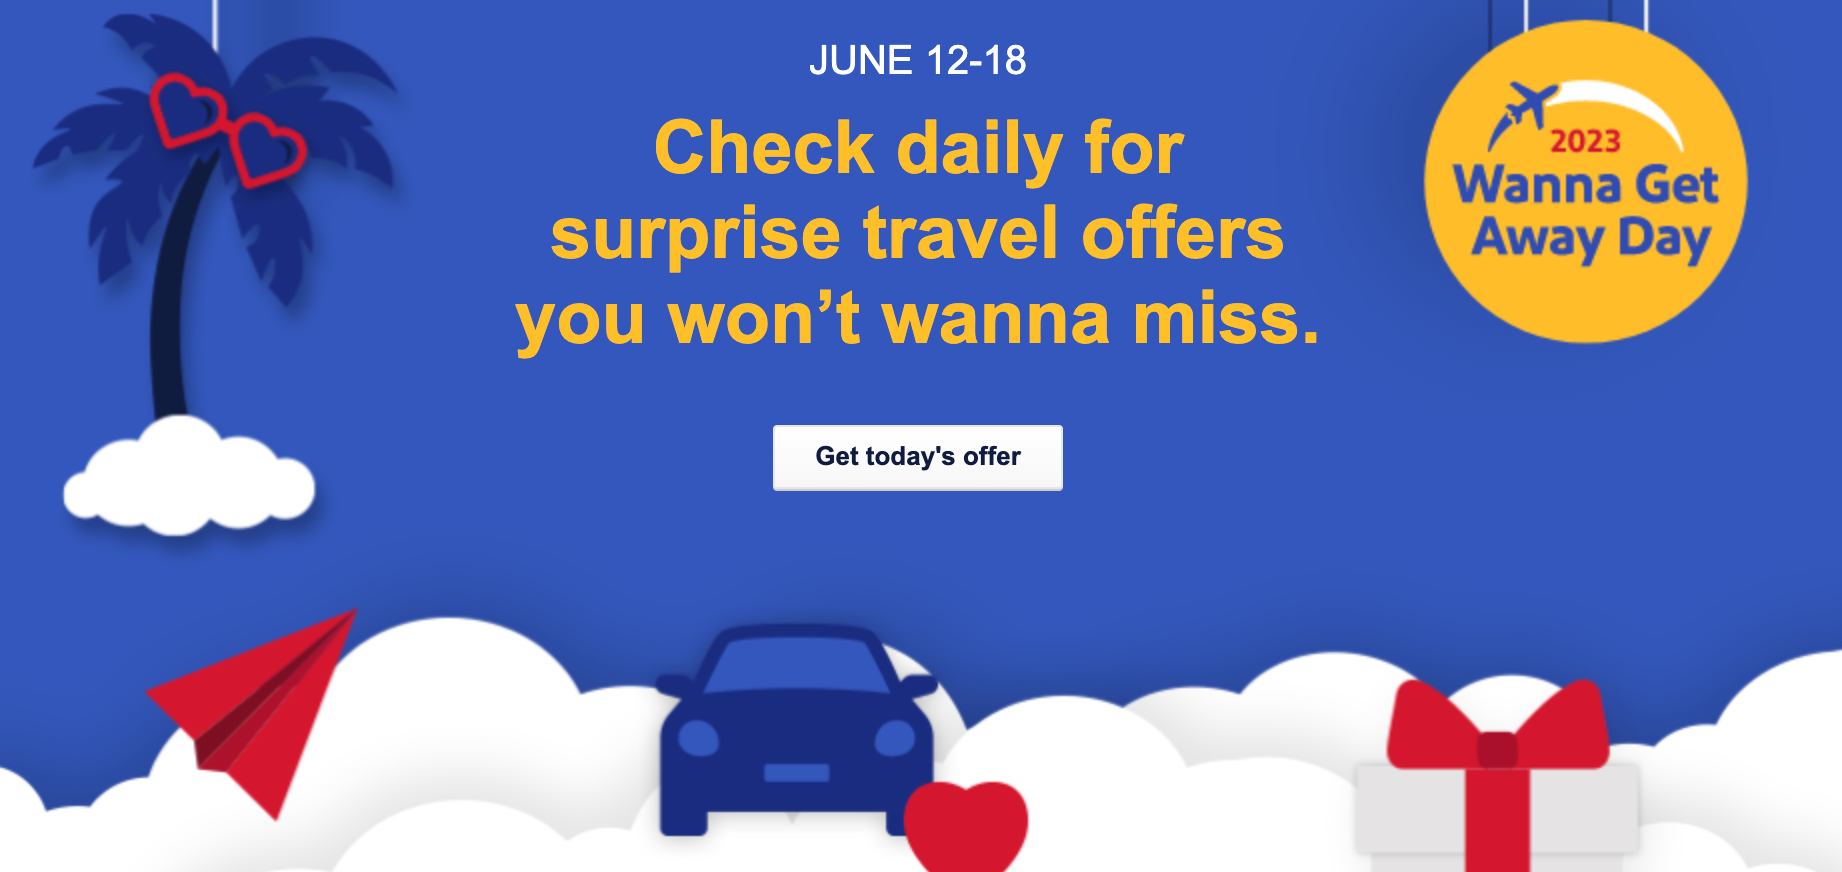 SOUTHWEST AIRLINES CELEBRATES ITS BIRTHDAY WEEK WITH 40% OFF BASE FARES AND  A WEEK-LONG SWEEPSTAKES